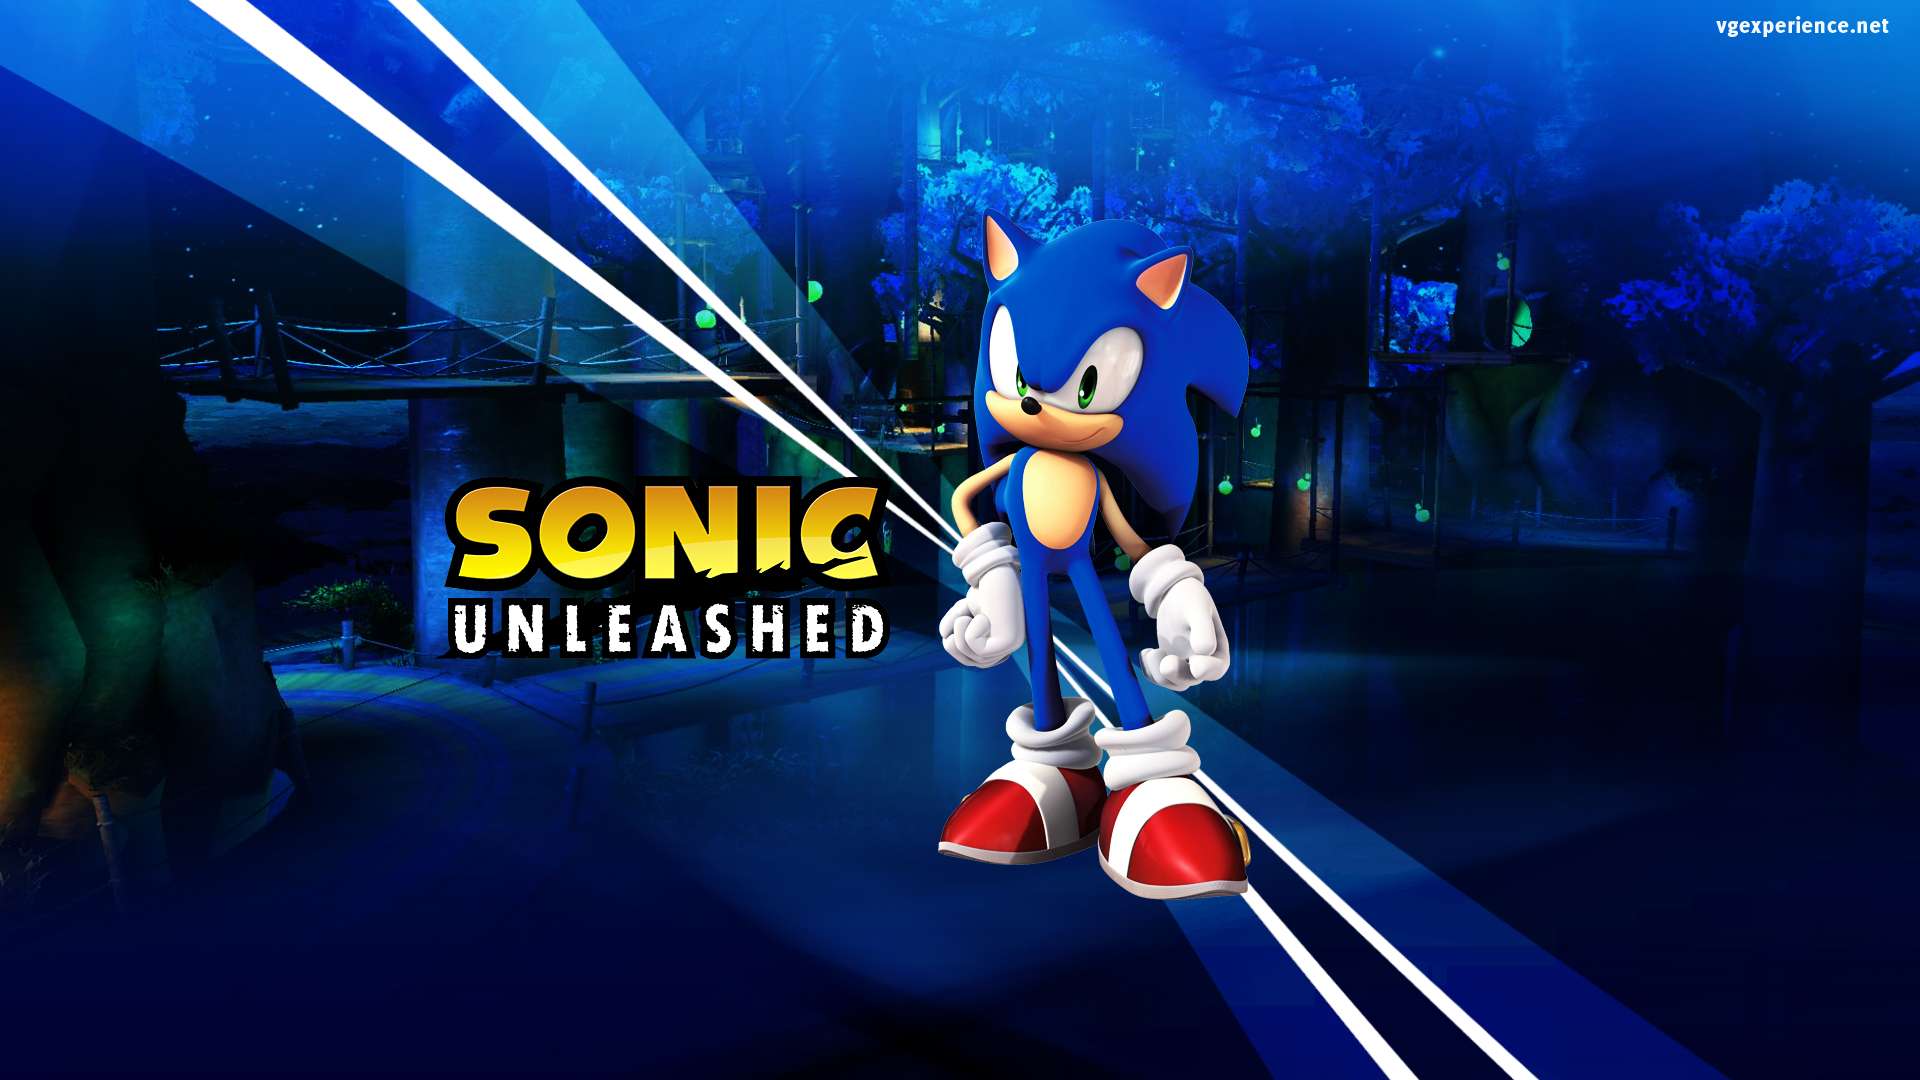 Games Wallpaper Sonic Unleashed